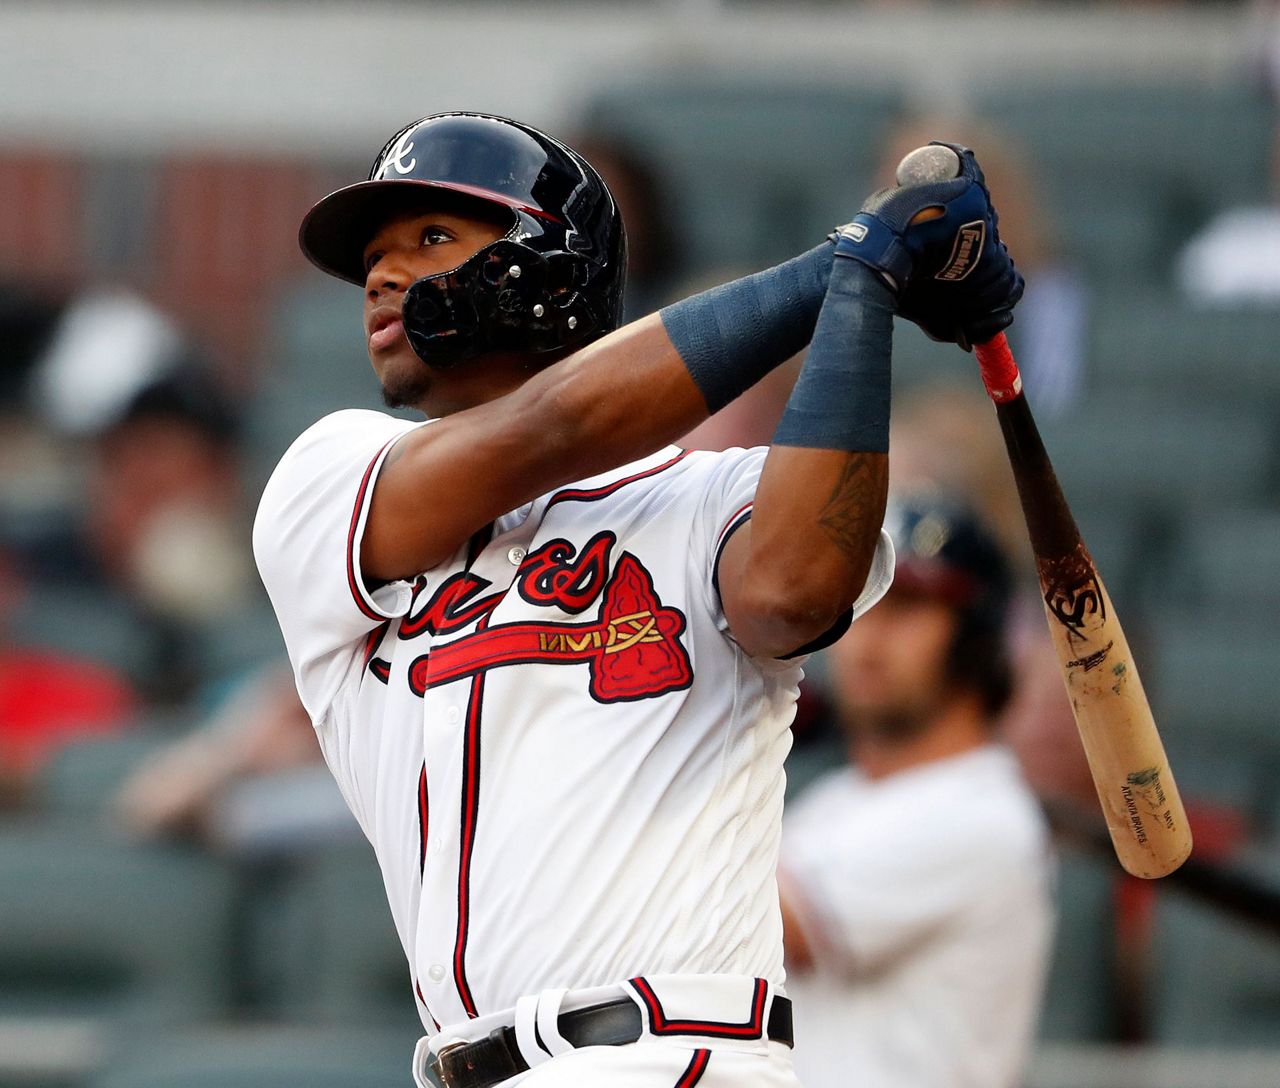 Albies goes deep twice in Braves' win over Marlins